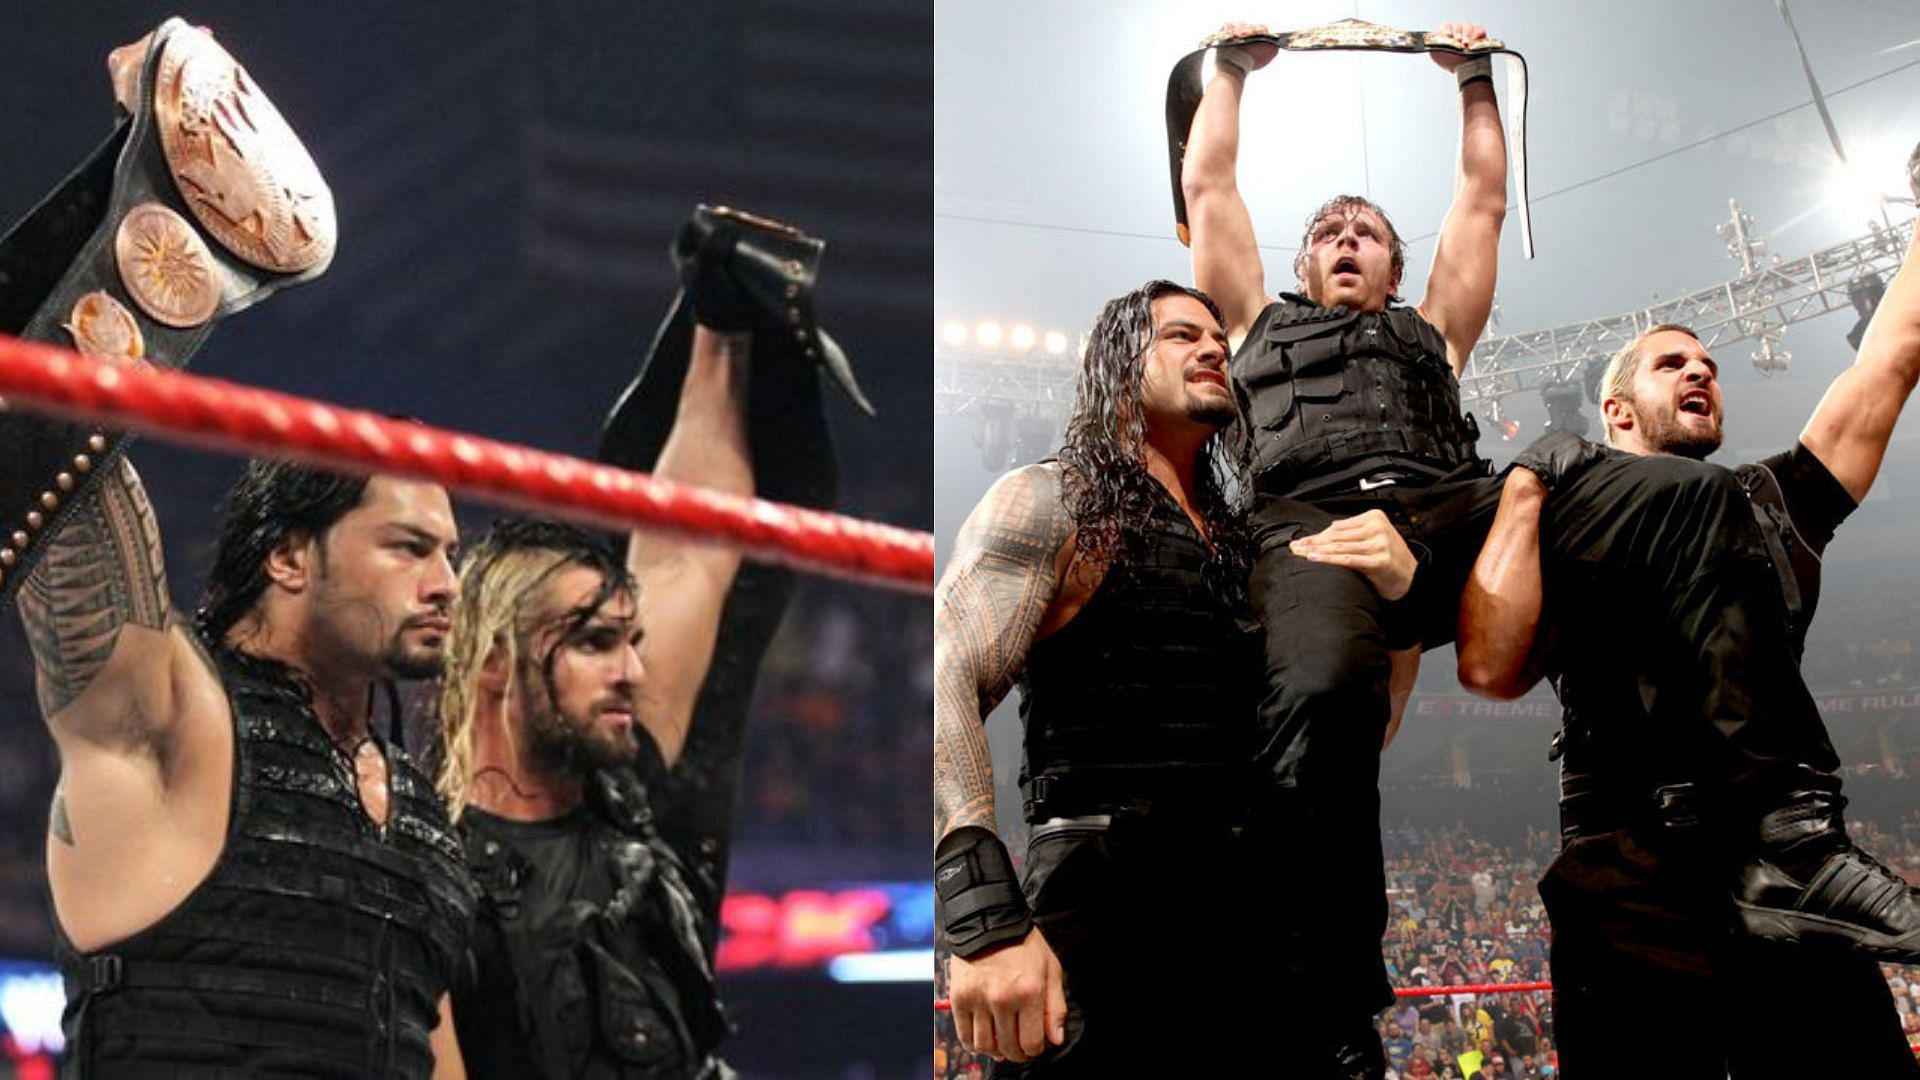 WWE group The Shield (Roman Reigns, Seth Rollins, and Jon Moxley)